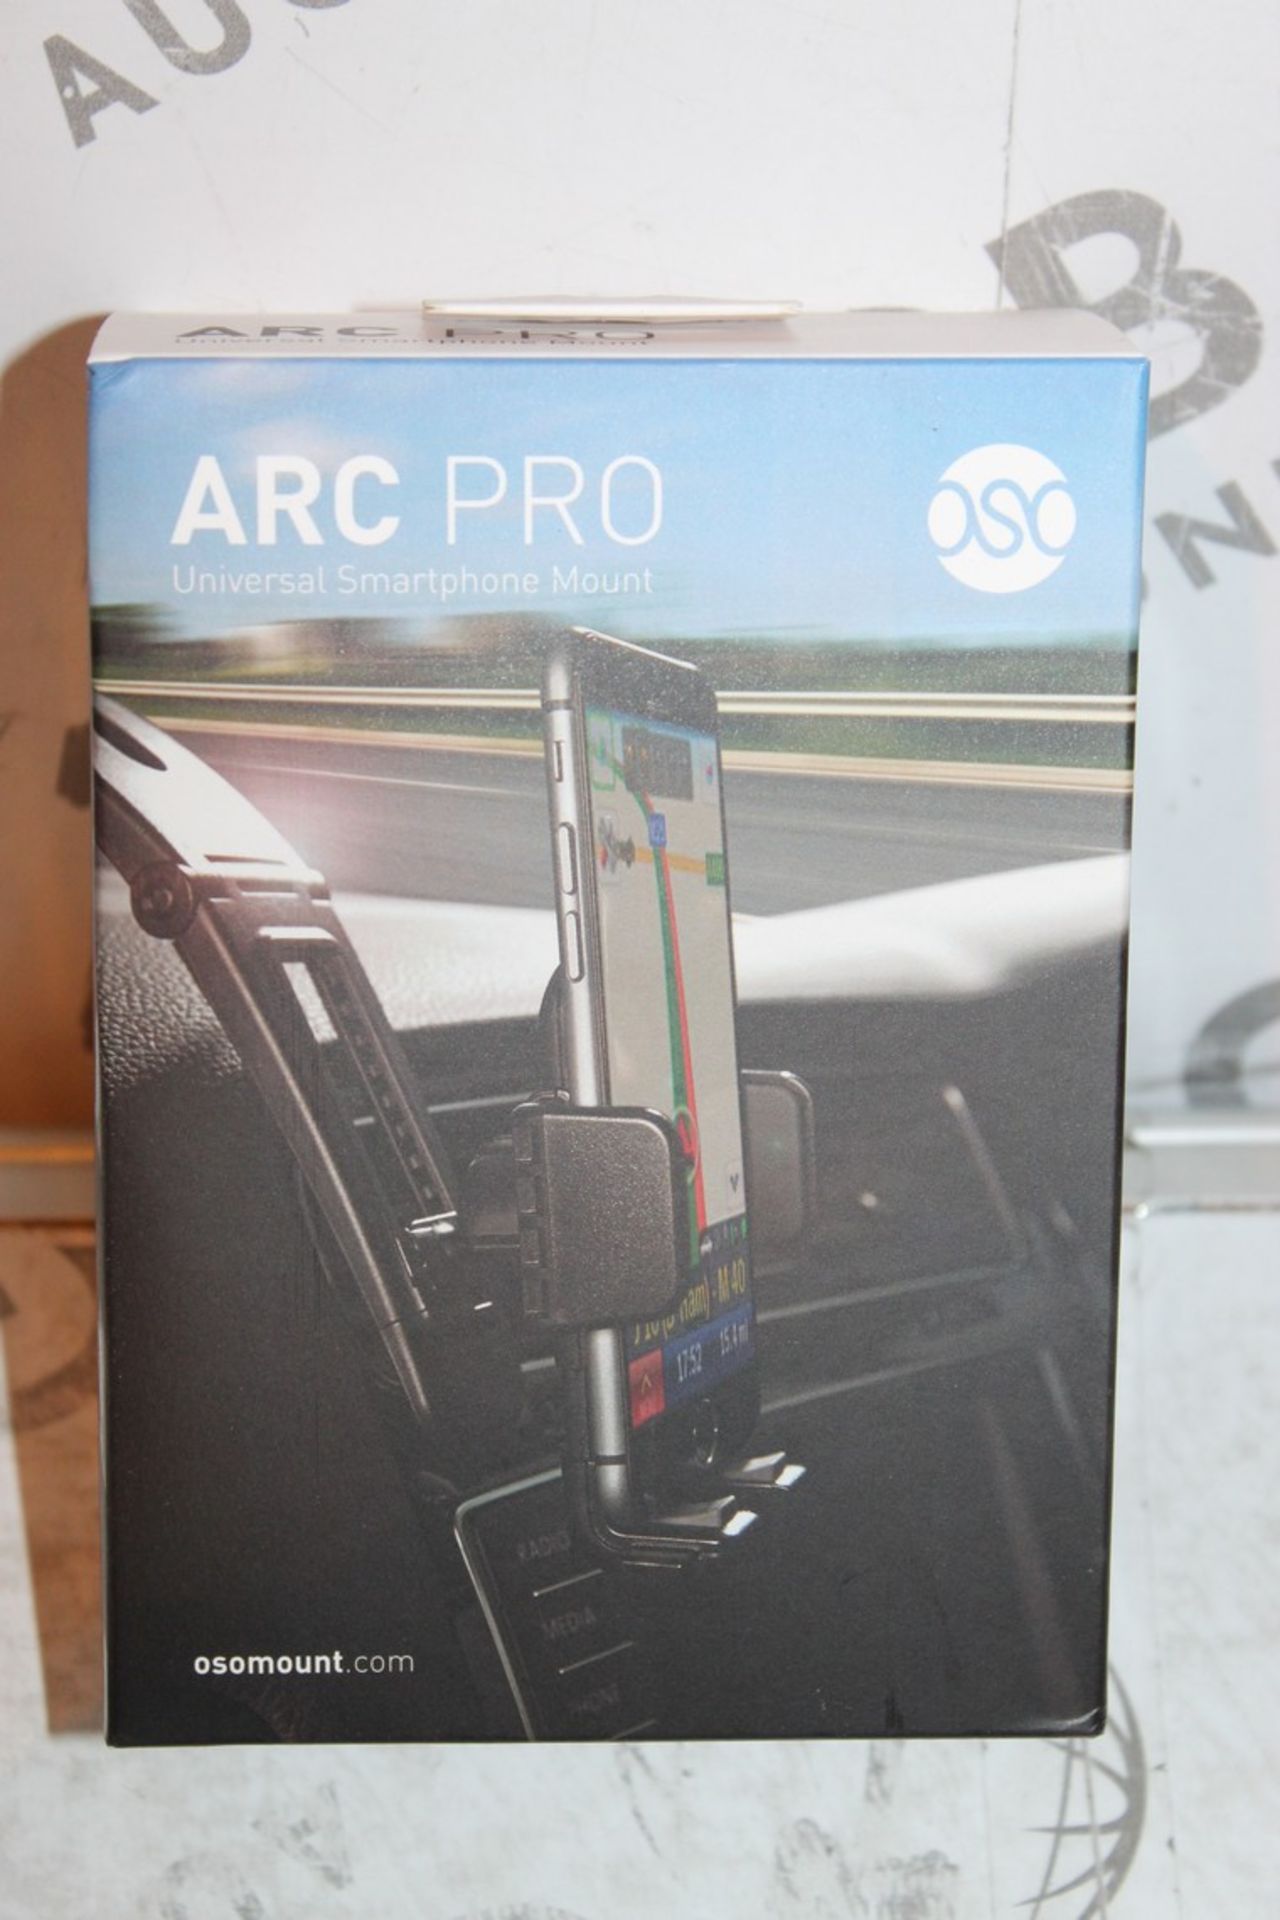 3 Boxed Oso Pro Ark Universal Smart Phone Holders, Combined RRP£90.00